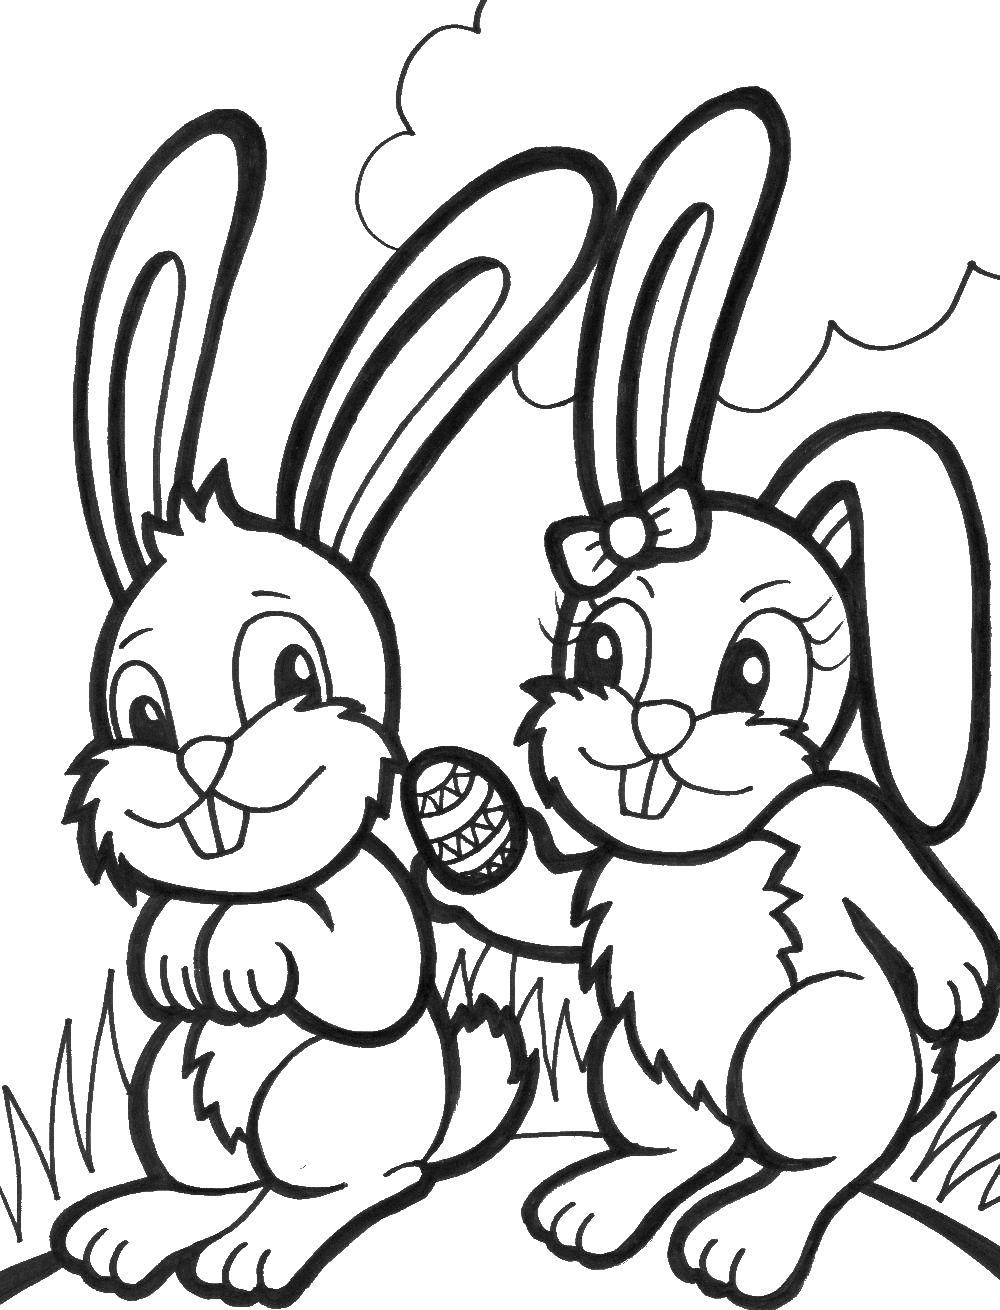 Coloring Rabbits found Easter egg. Category coloring Easter. Tags:  rabbits, Easter egg.